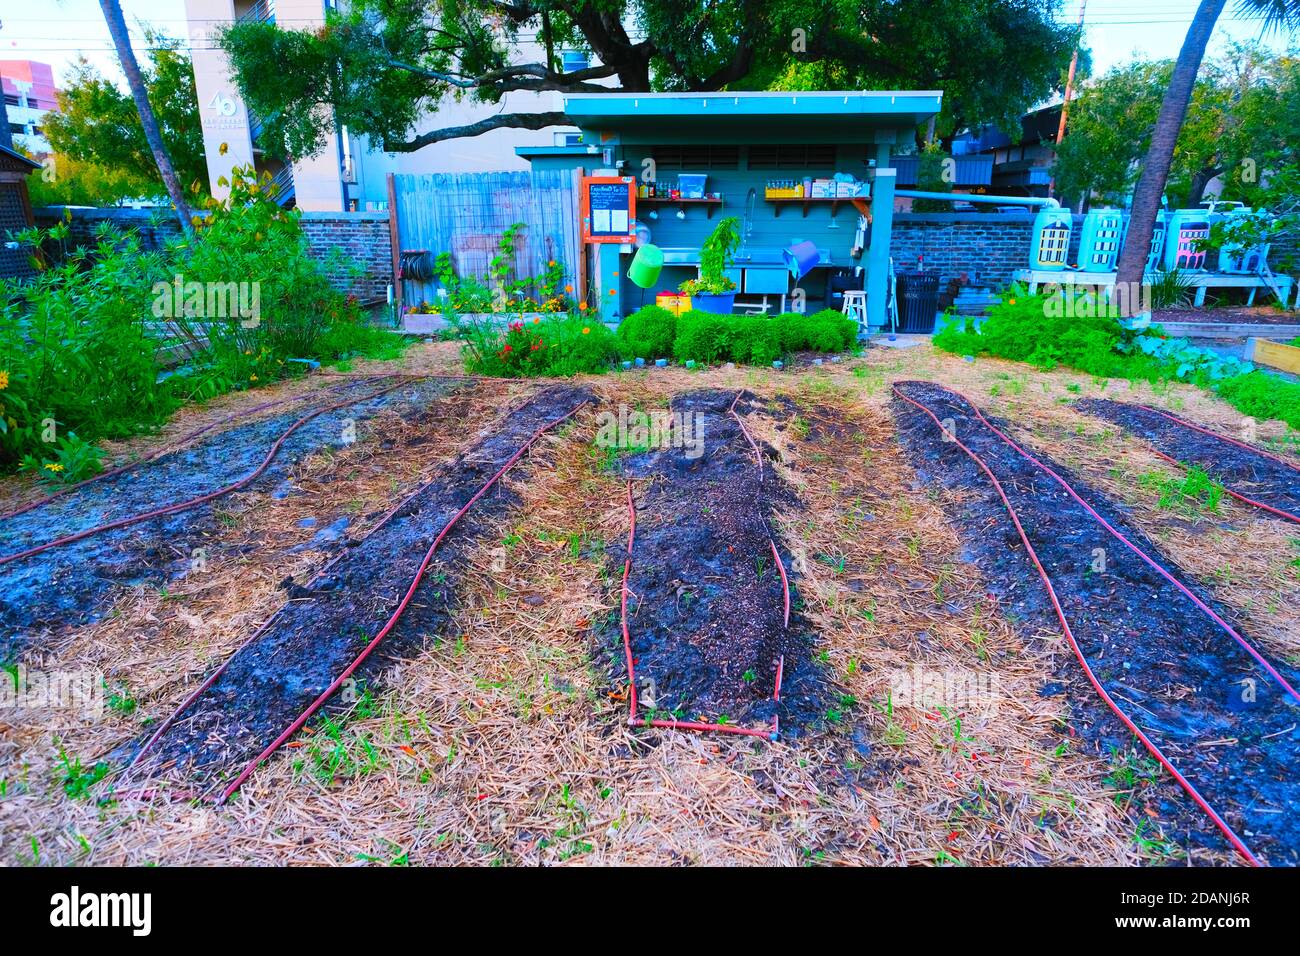 Urban Garden, Cabbage, Kale, New Plants, Small Pots, Painted Rocks, Glass House, Red Cart, Copper Pipes,Tool, Shed,Vegetable Puns Stock Photo